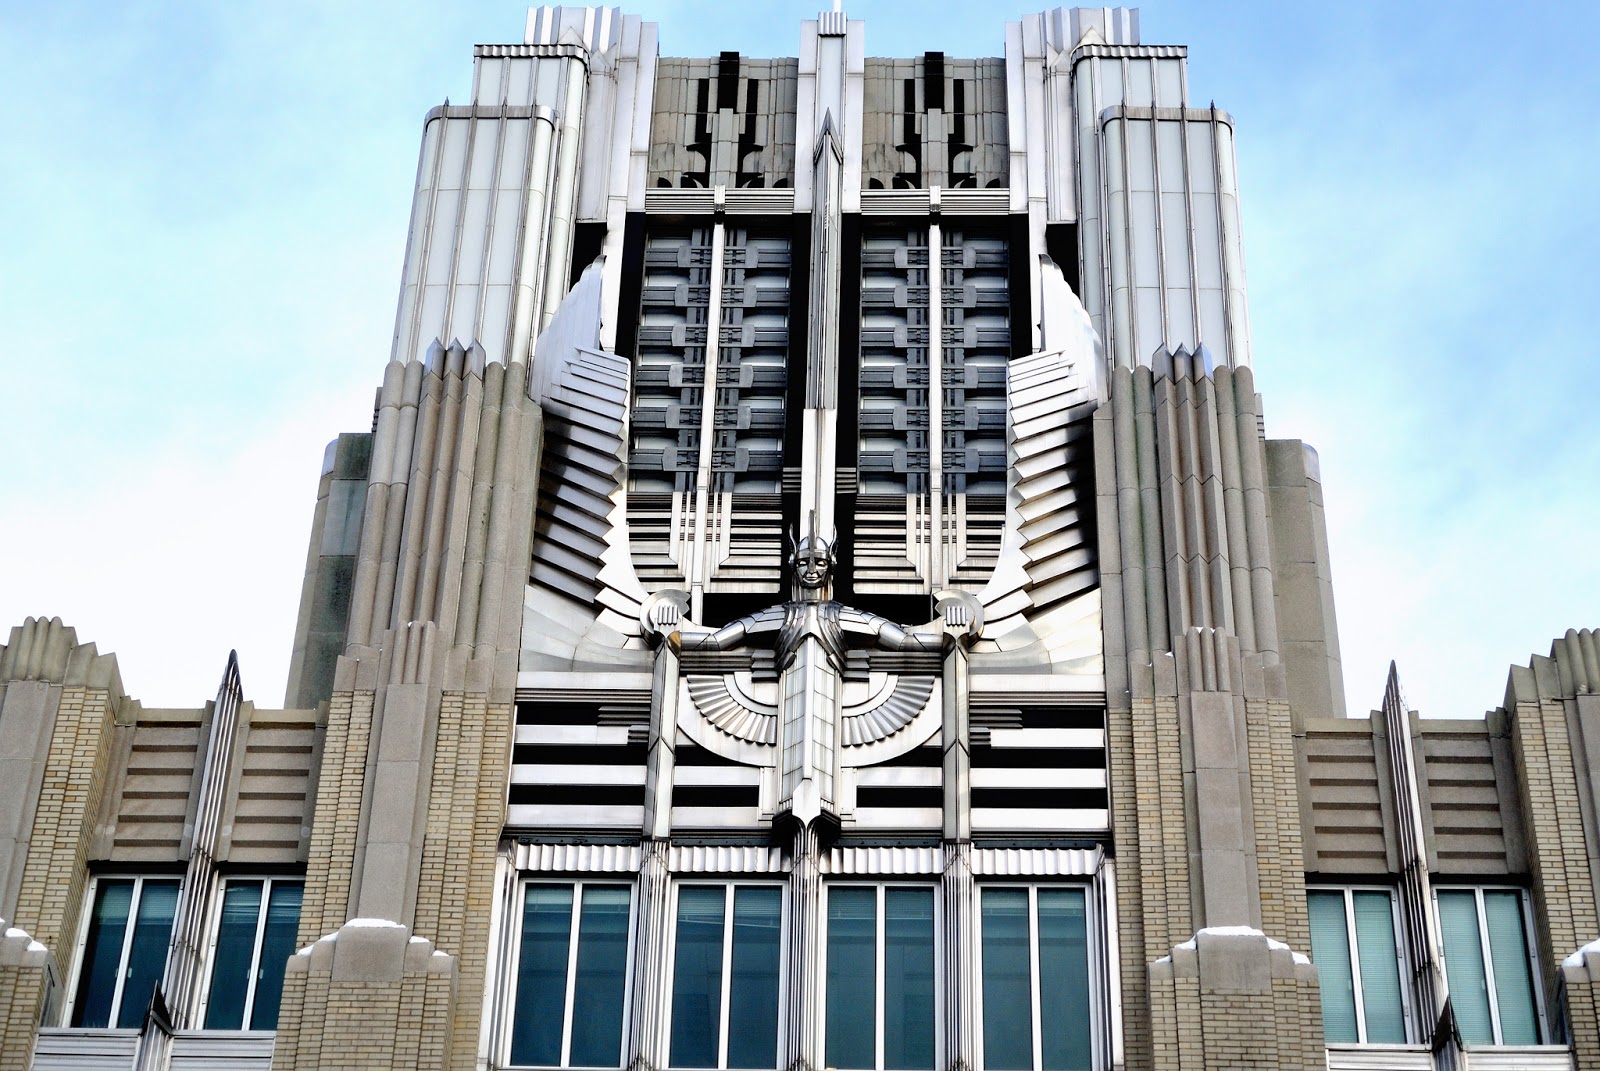 The 10 Most Fascinating Art Deco Buildings You Need To Know - Arch2O.com